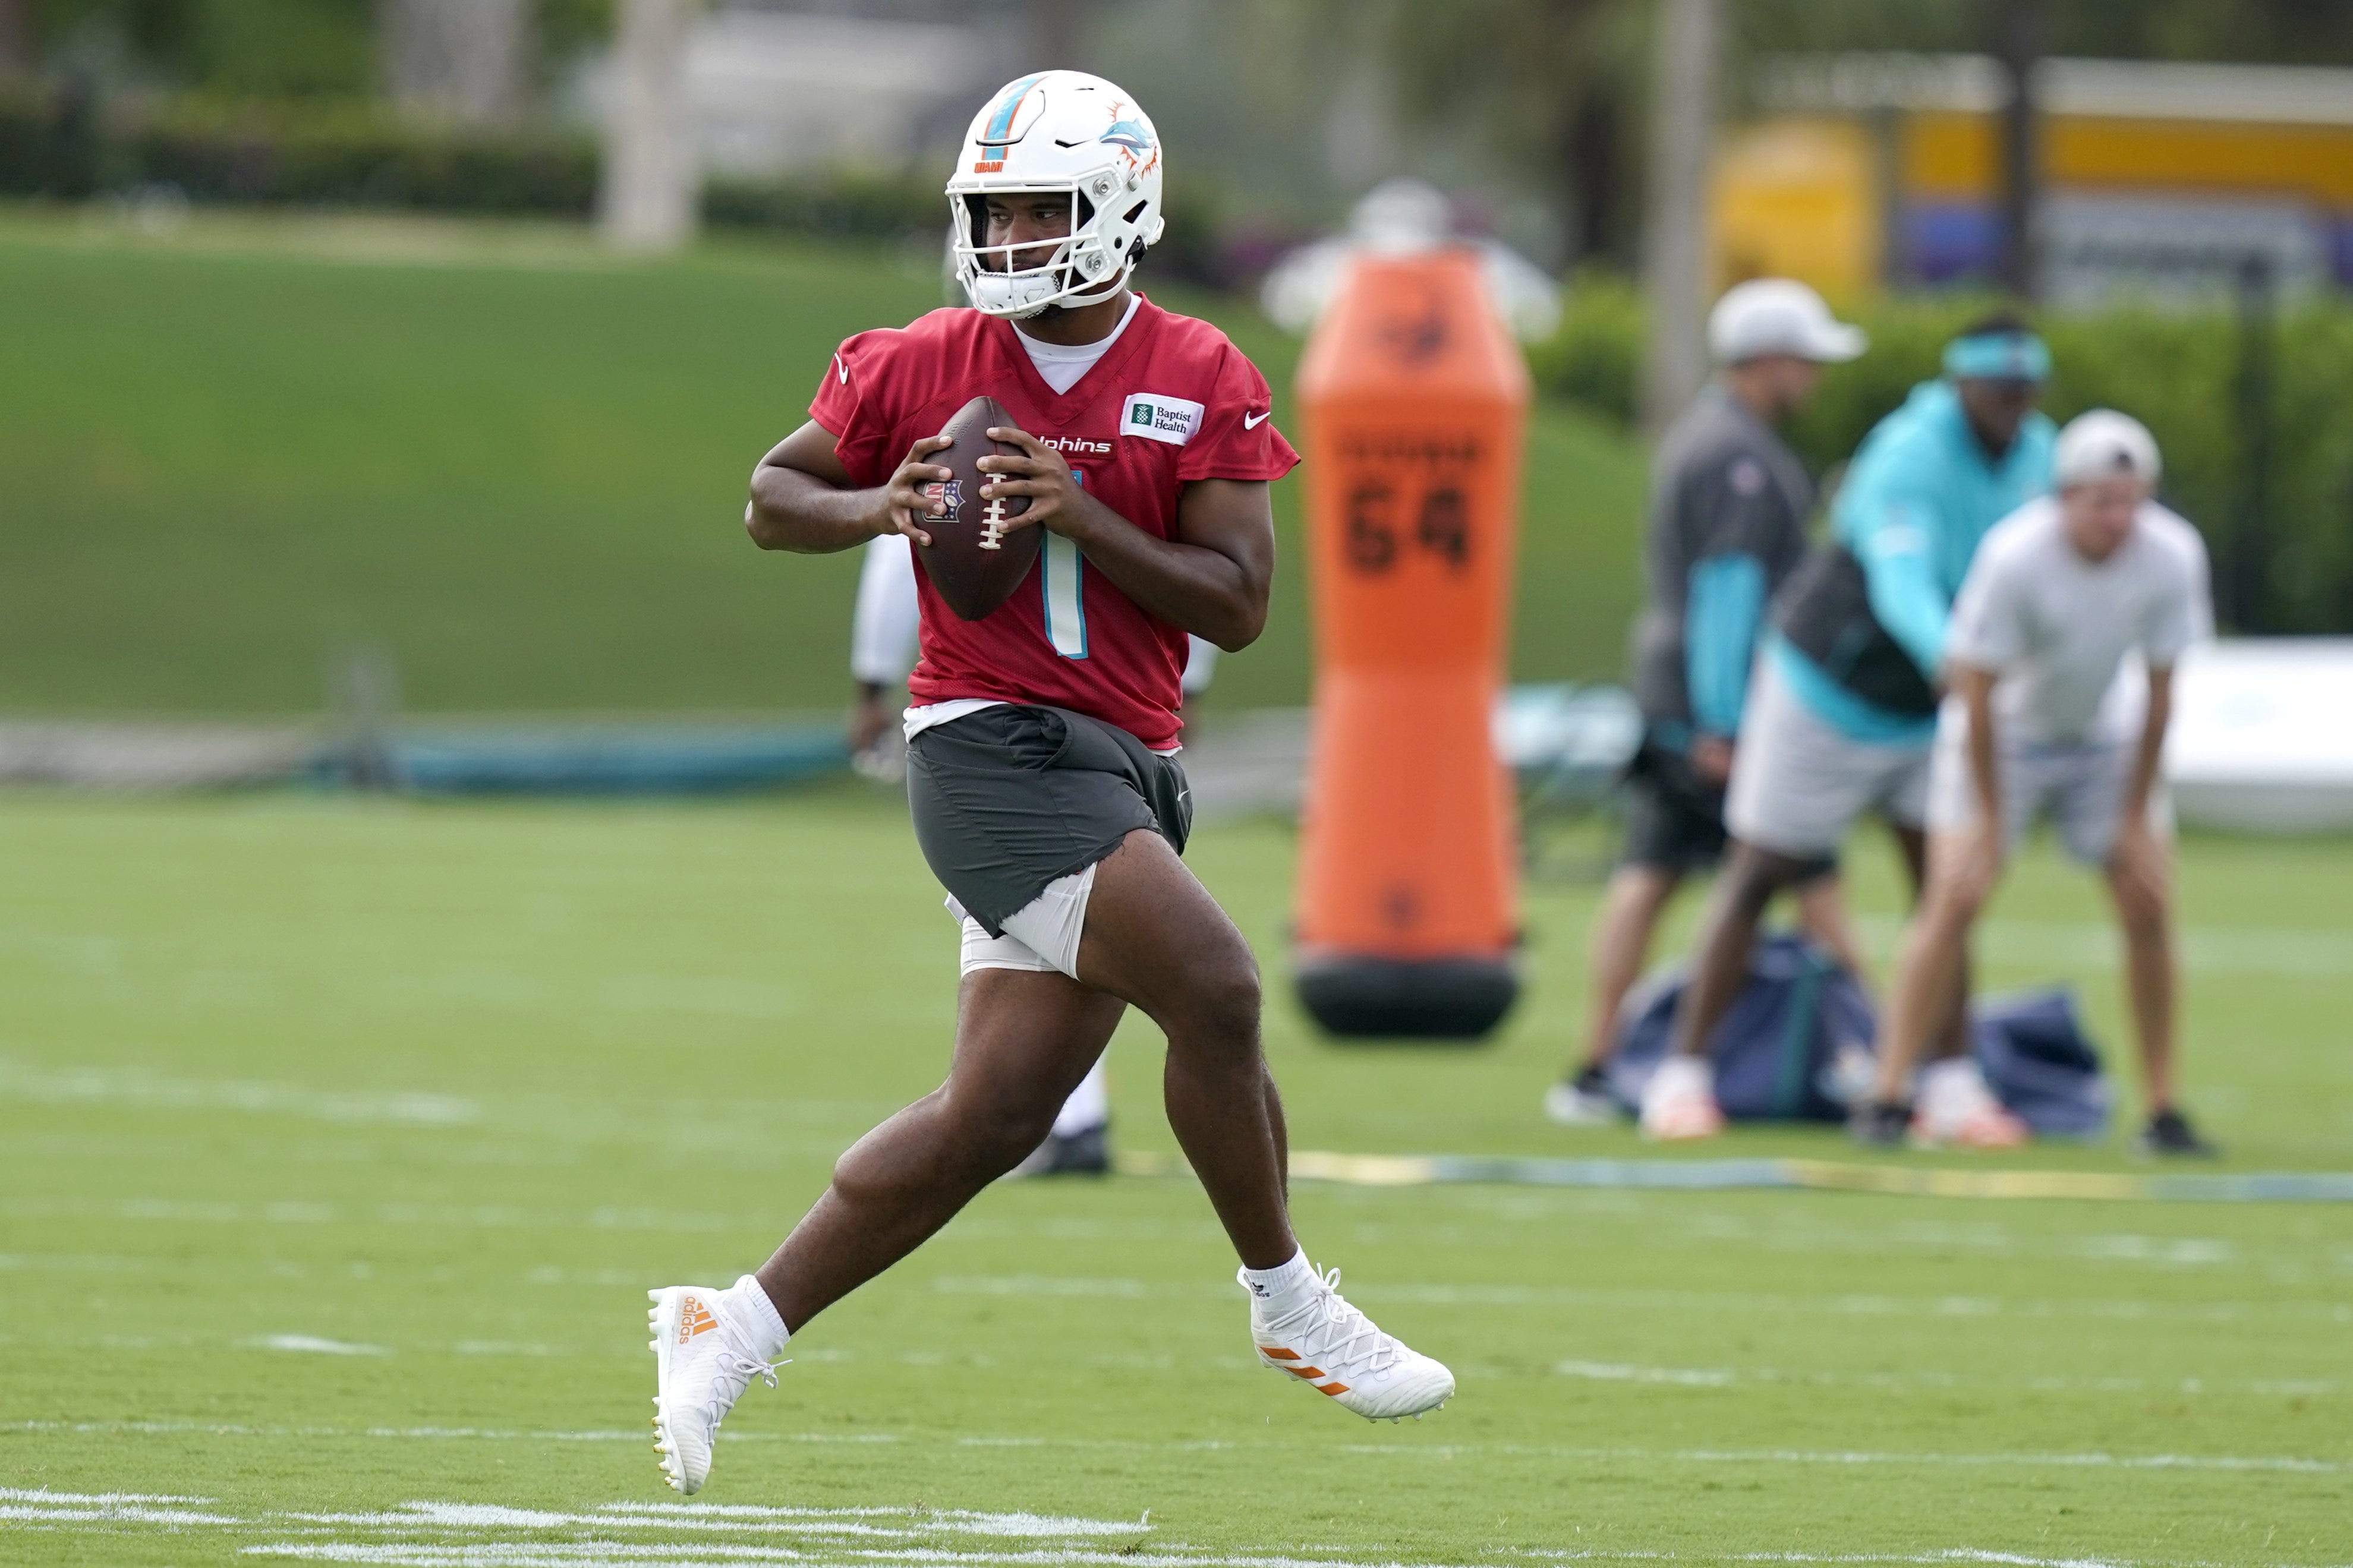 e6dcc230-b684-4d7a-9be4-ba393ad3a332-Dolphins_Football_11 Listen Now! Can the Dolphins live up to the hype, or will the season end in disappointment?